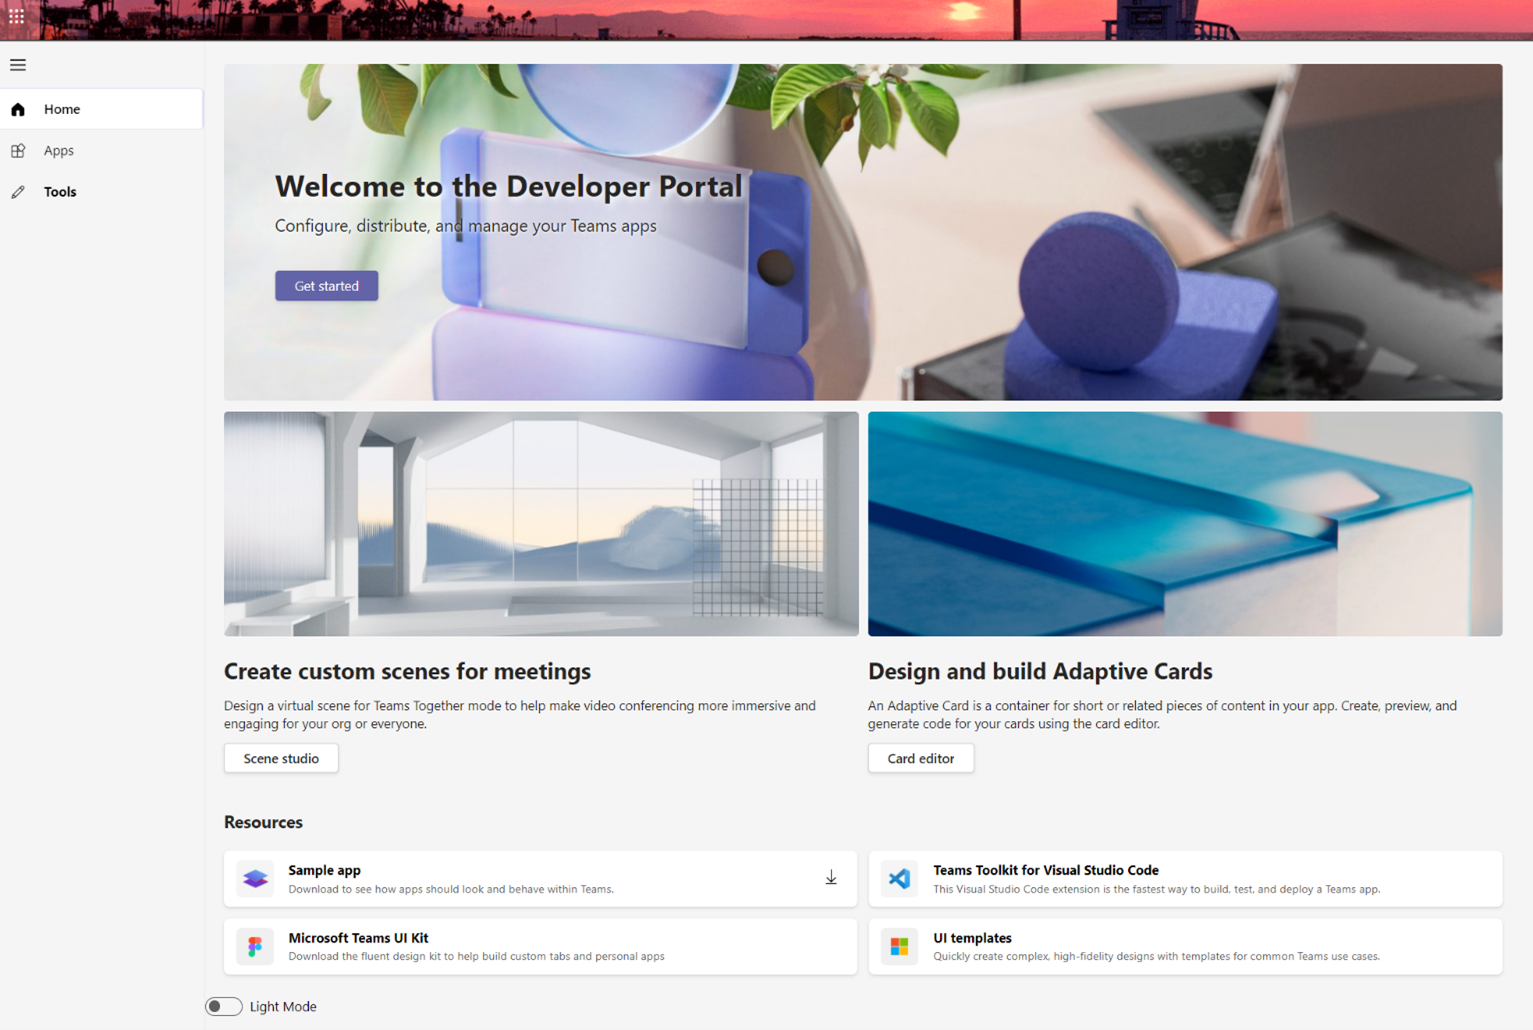 Visual showing the home page of the Developer Portal.